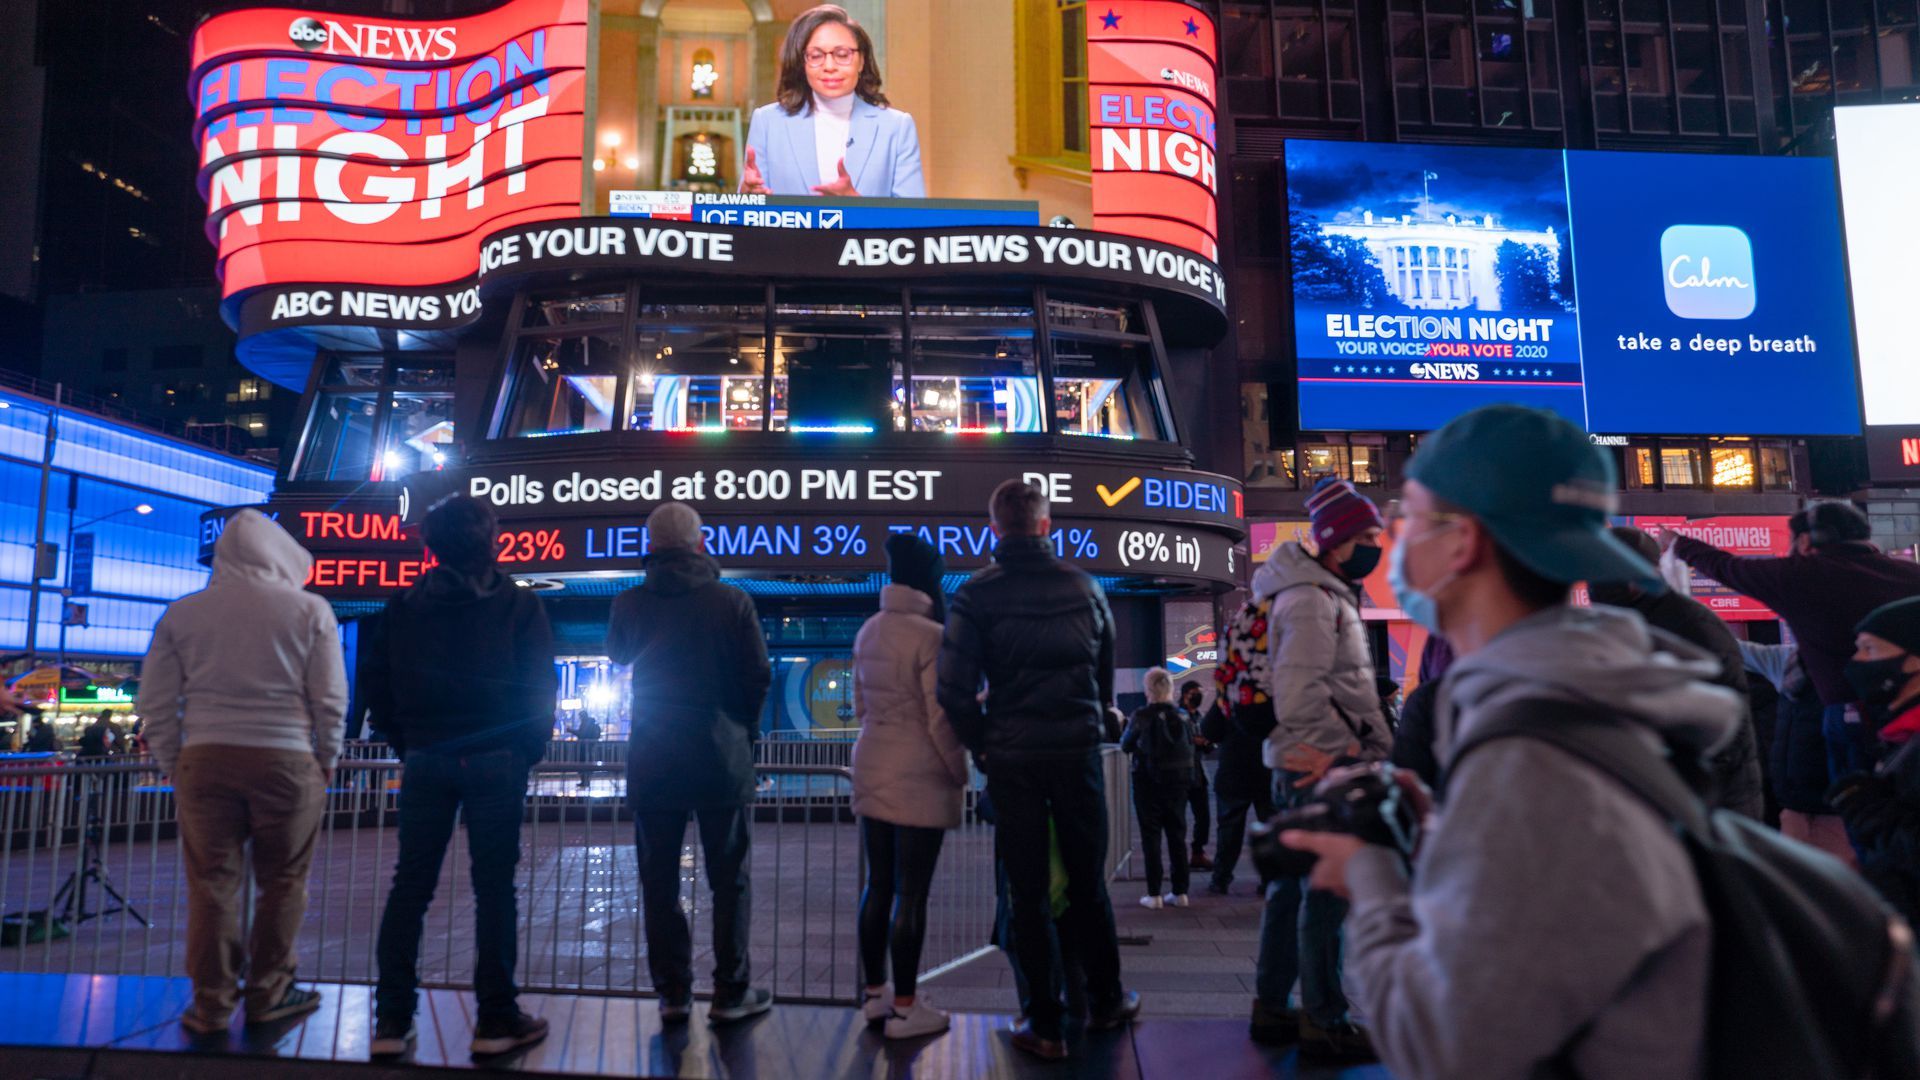 People gather in Times Square as they await election results in New York City.